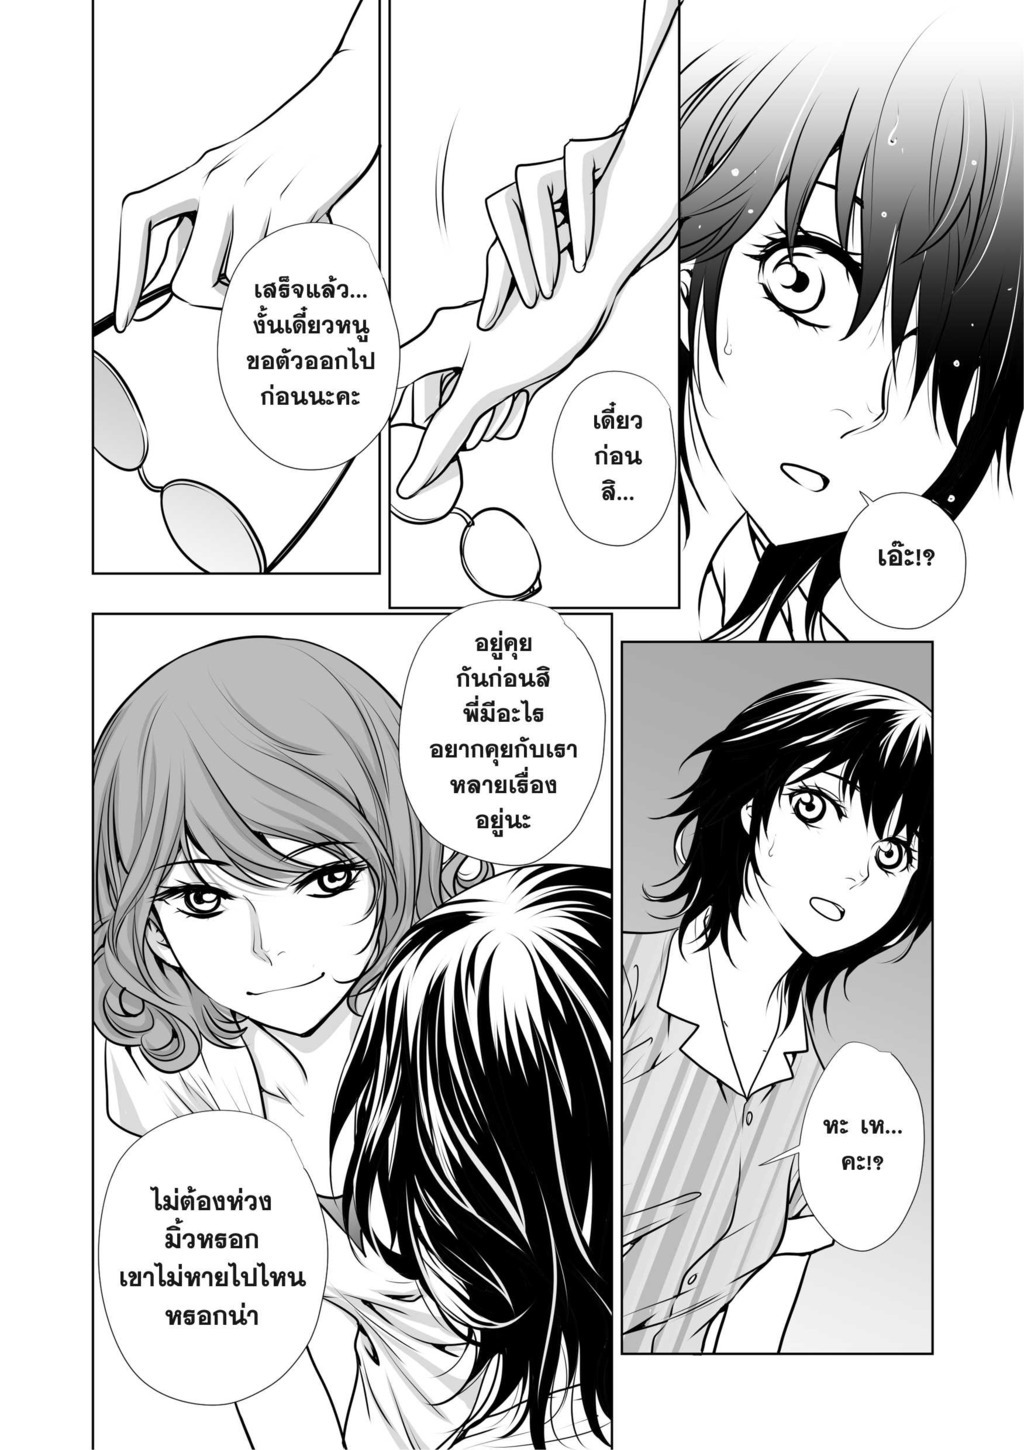   Lily Love Chapter 14 (part 1 &amp; 2) - RAWS are here :D (log in via FB to